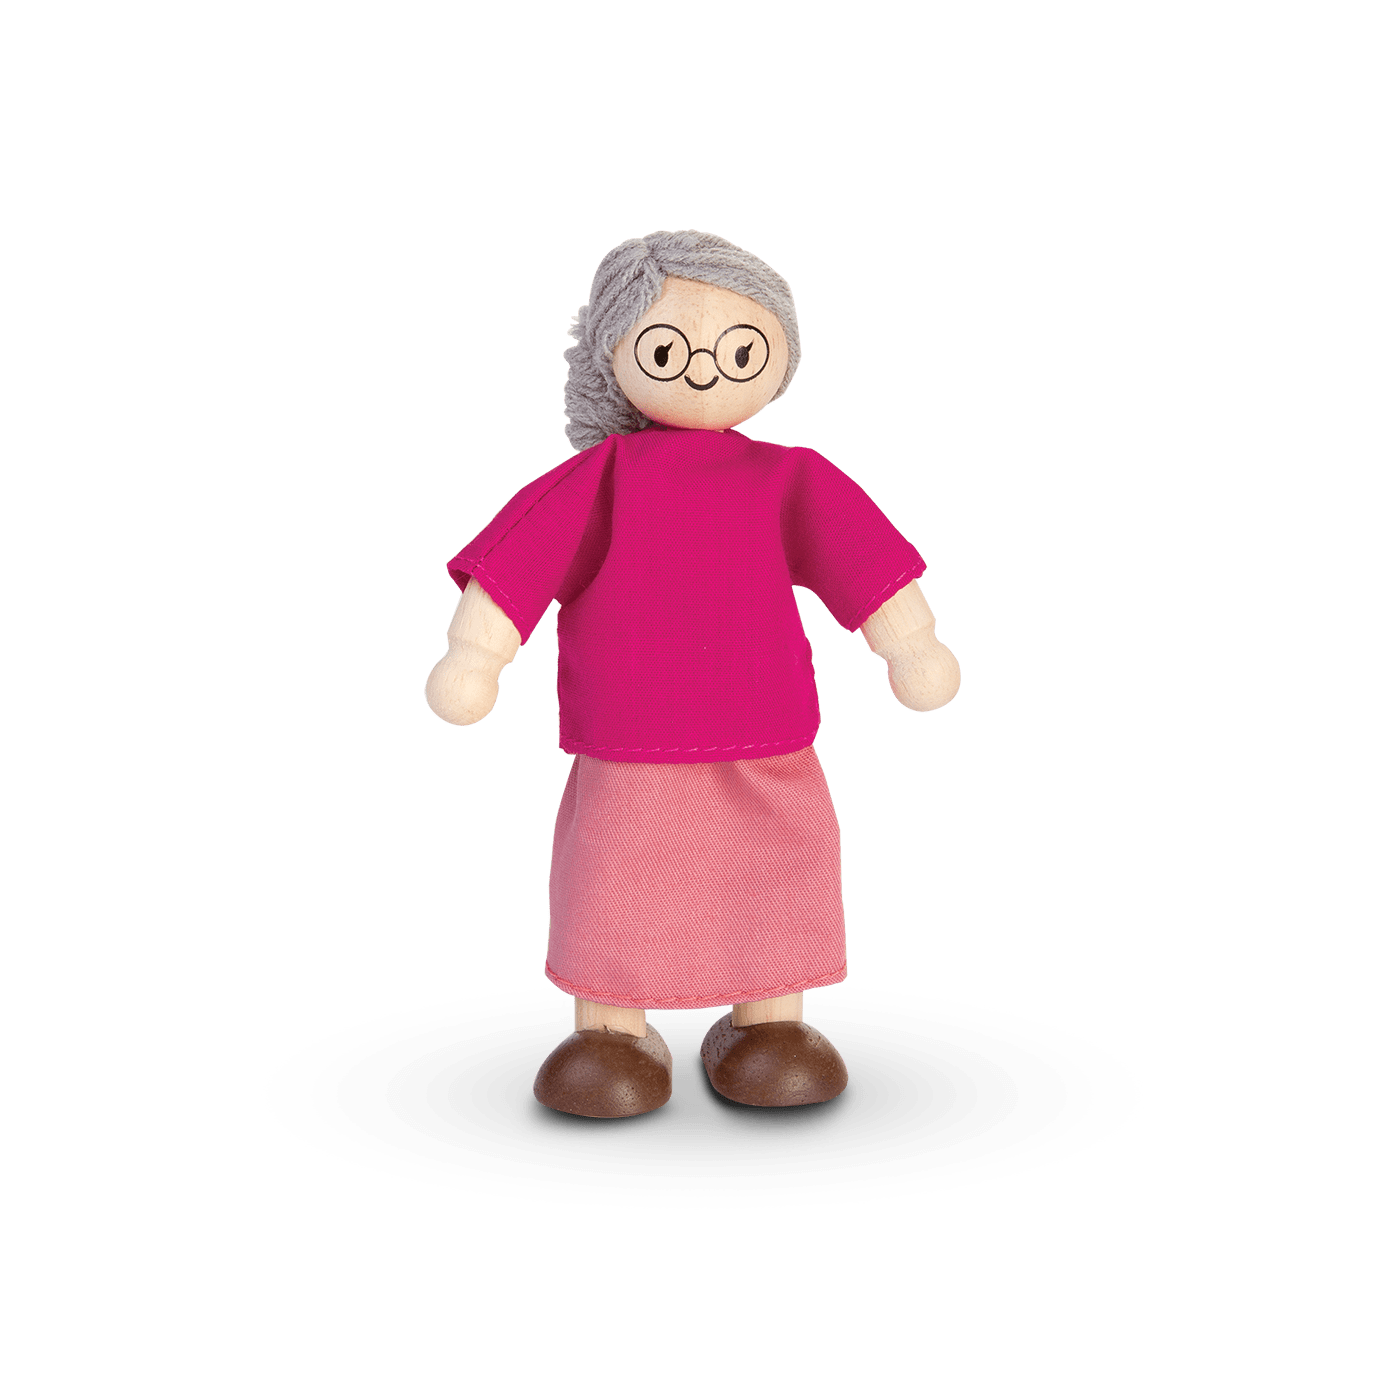 9851_PlanToys_GRANDMOTHER_Pretend_Play_Imagination_Social_Language_and_Communications_Coordination_Creative_Emotion_3yrs_Wooden_toys_Education_toys_Safety_Toys_Non-to